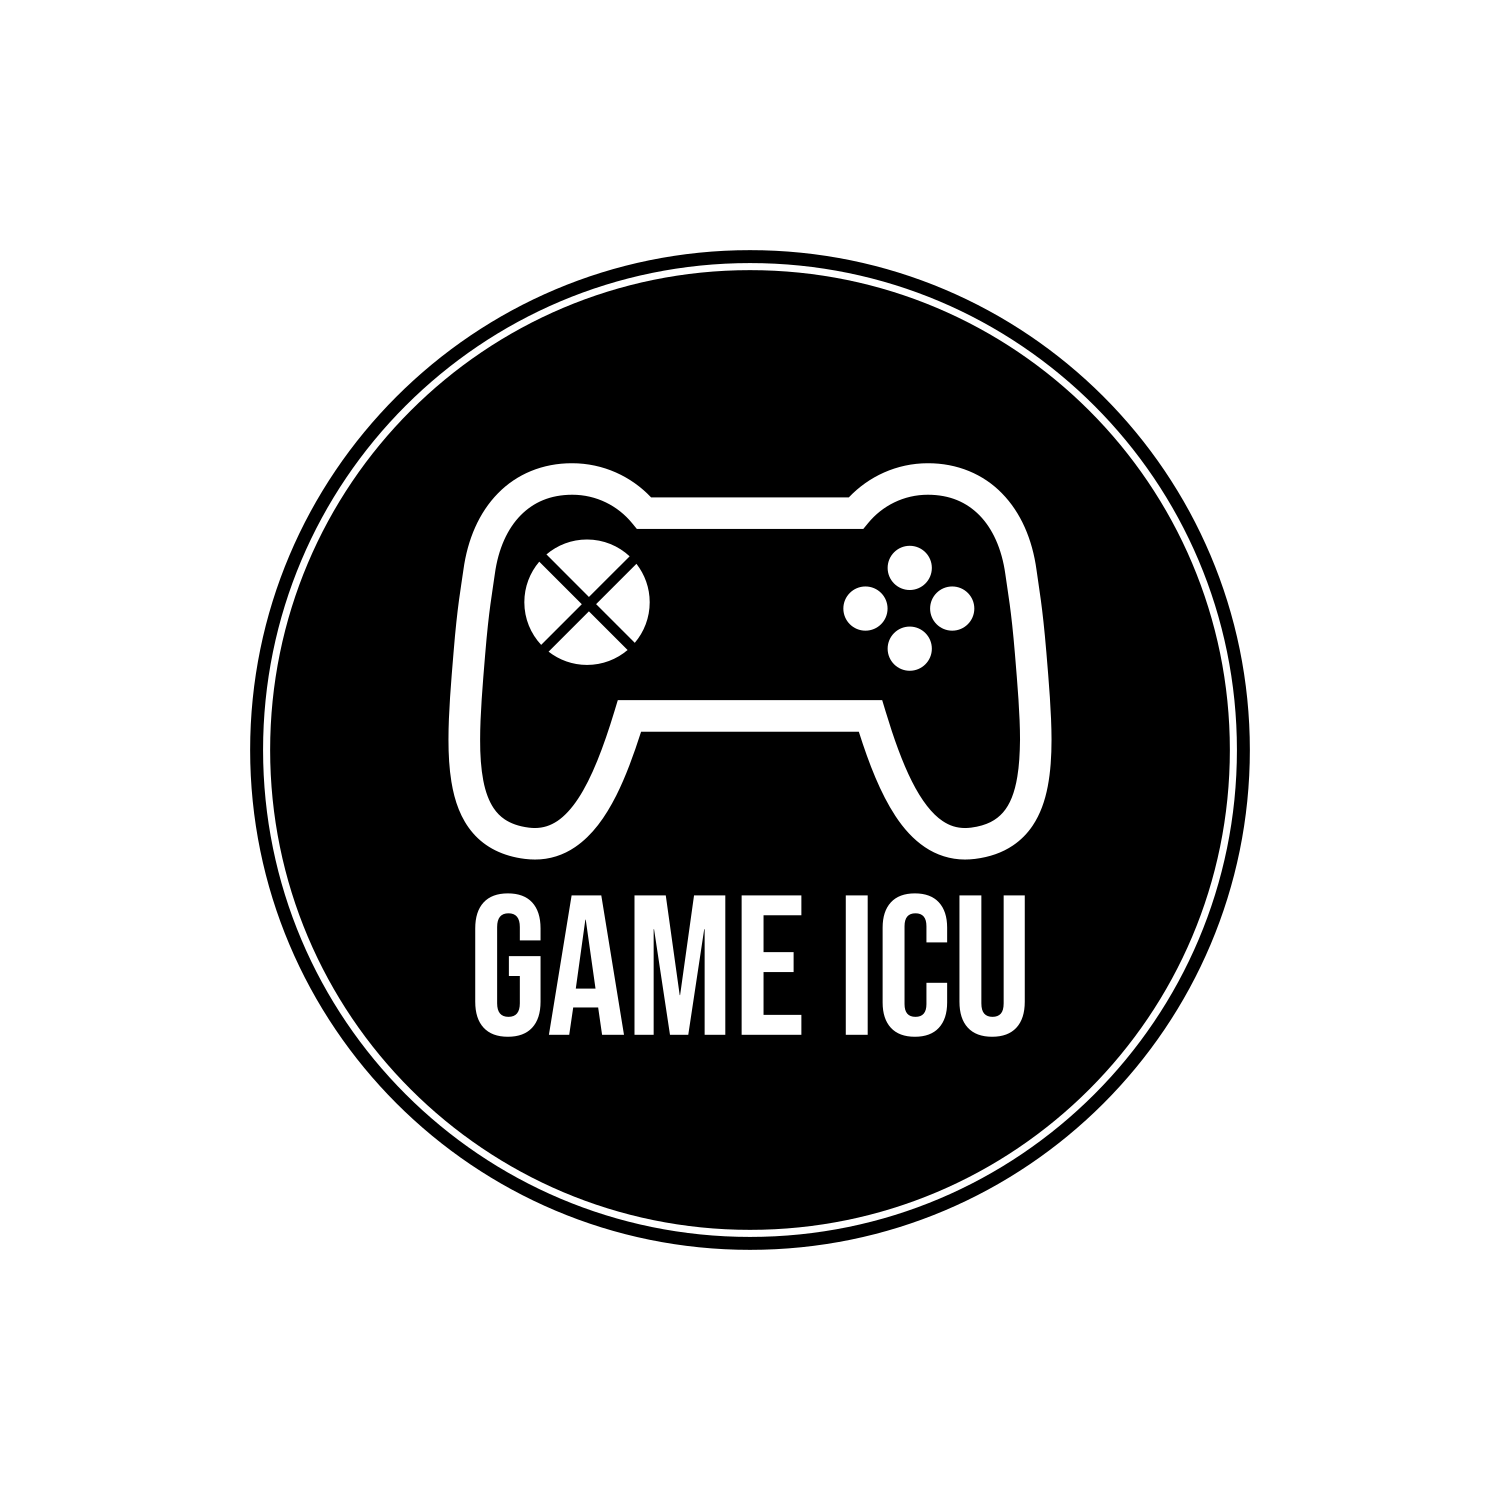 GameIcu - Terms & Conditions